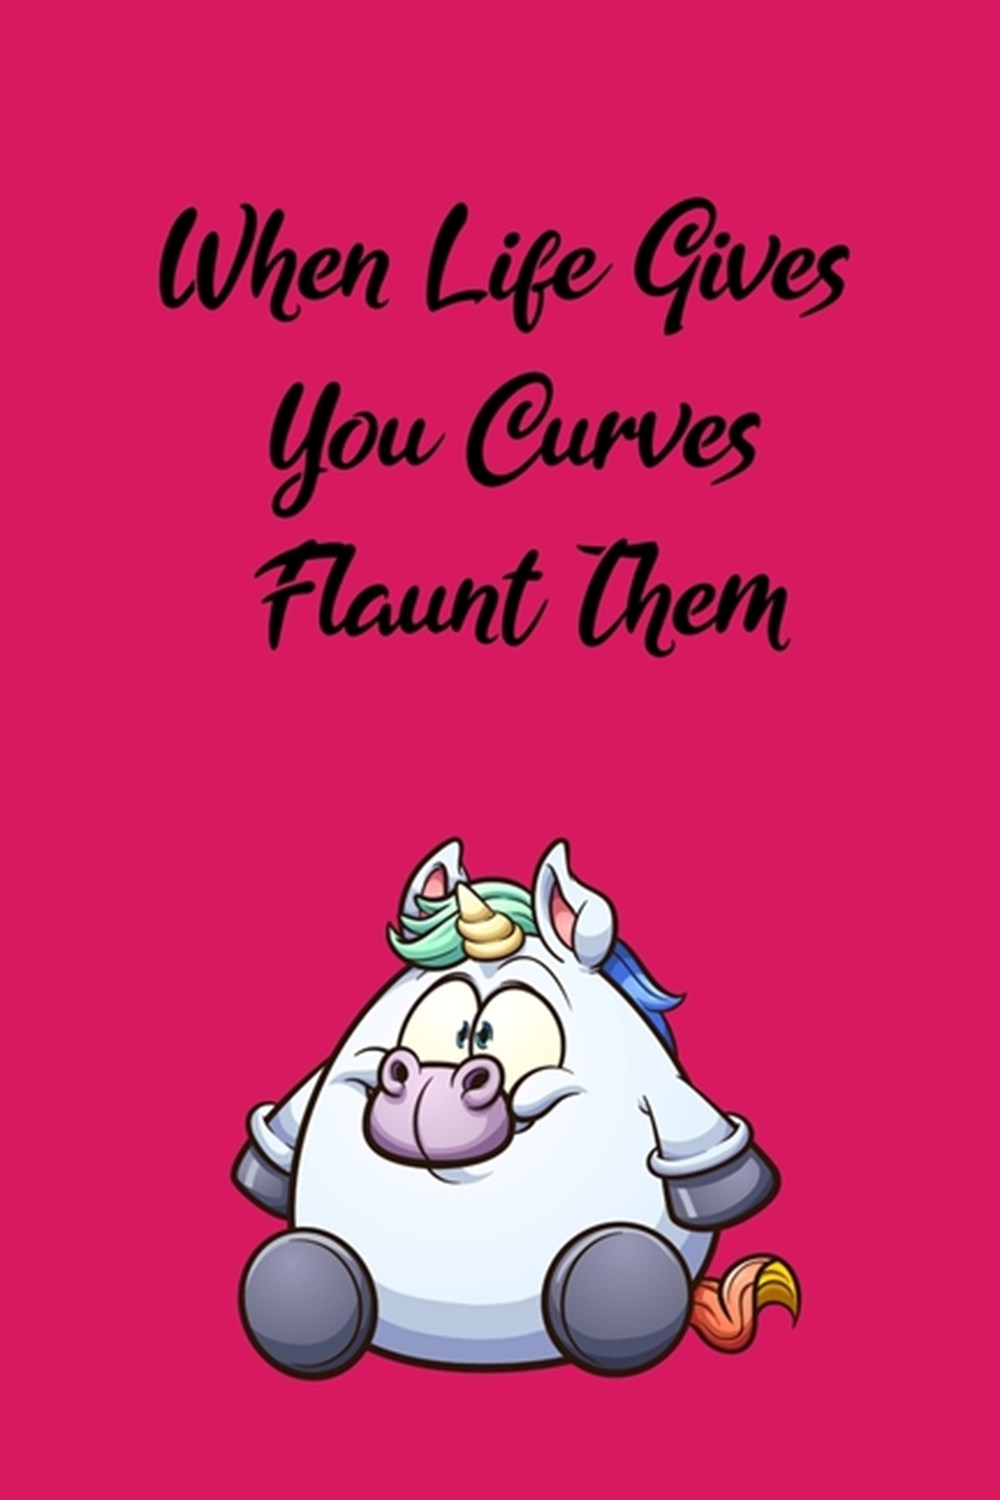 When life gives you curves flaunt them Fitness Planner - Fitness Journal For Women, 120 custom pages